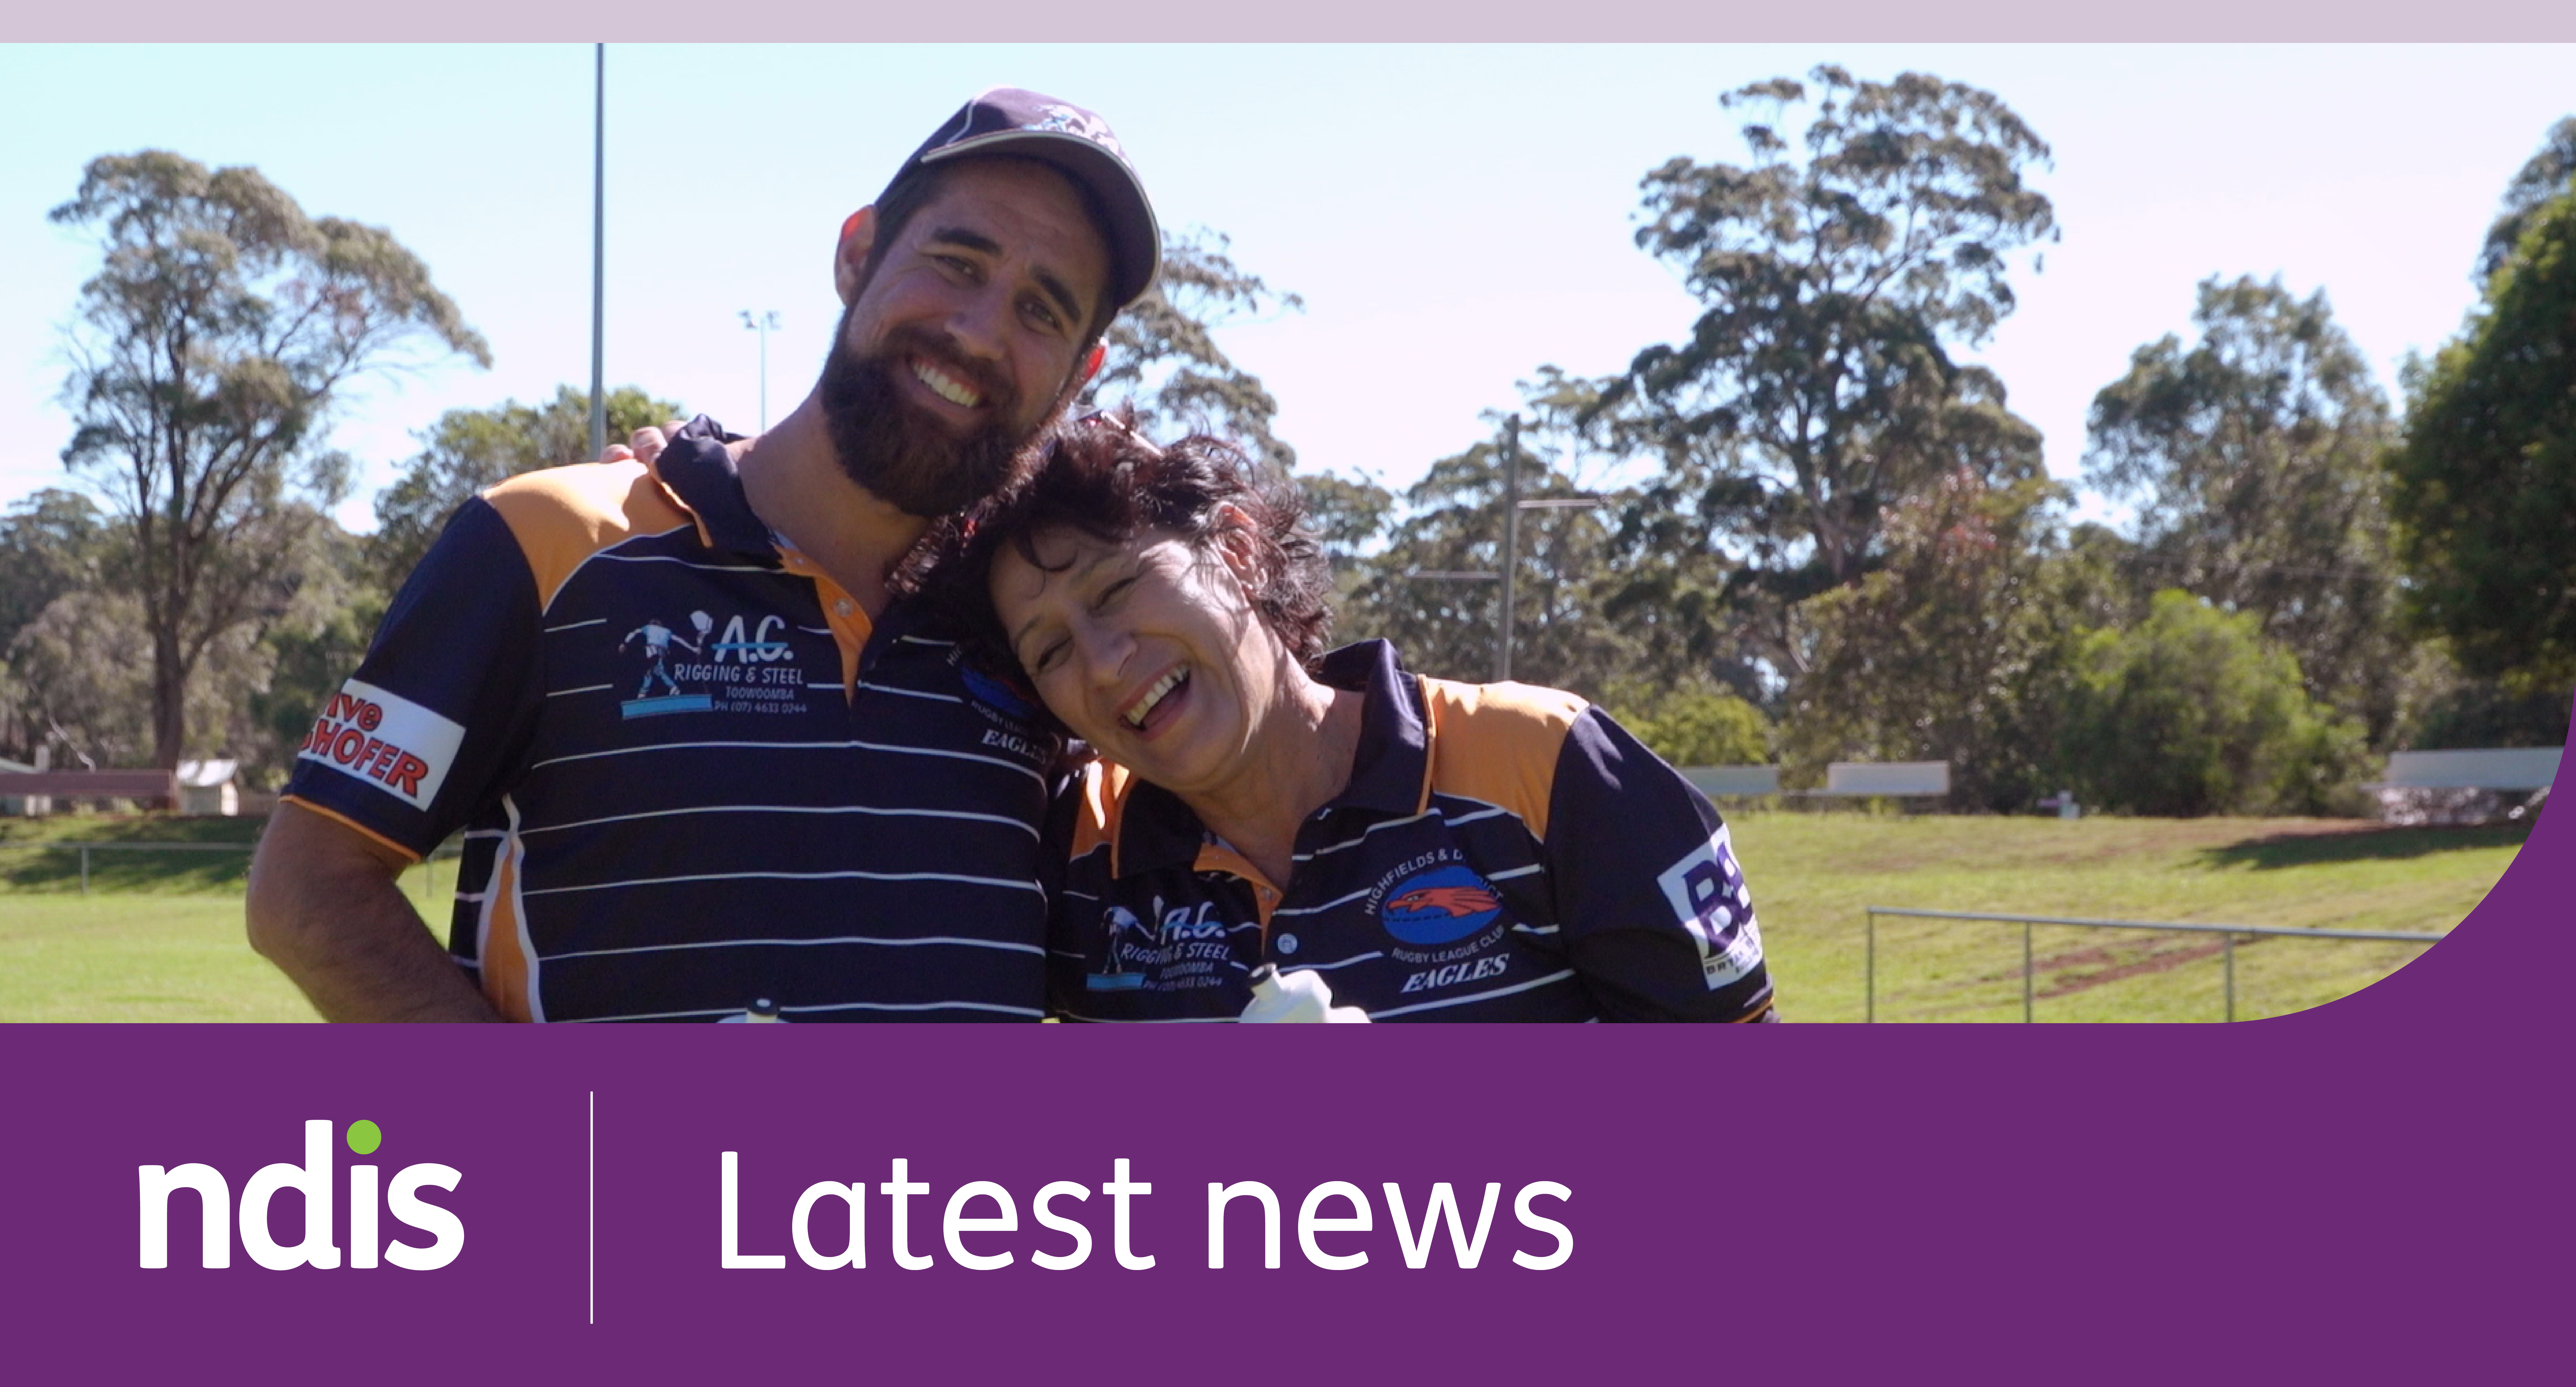 NDIS | Latest news with a picture of 2 people looking at the camera and smiling